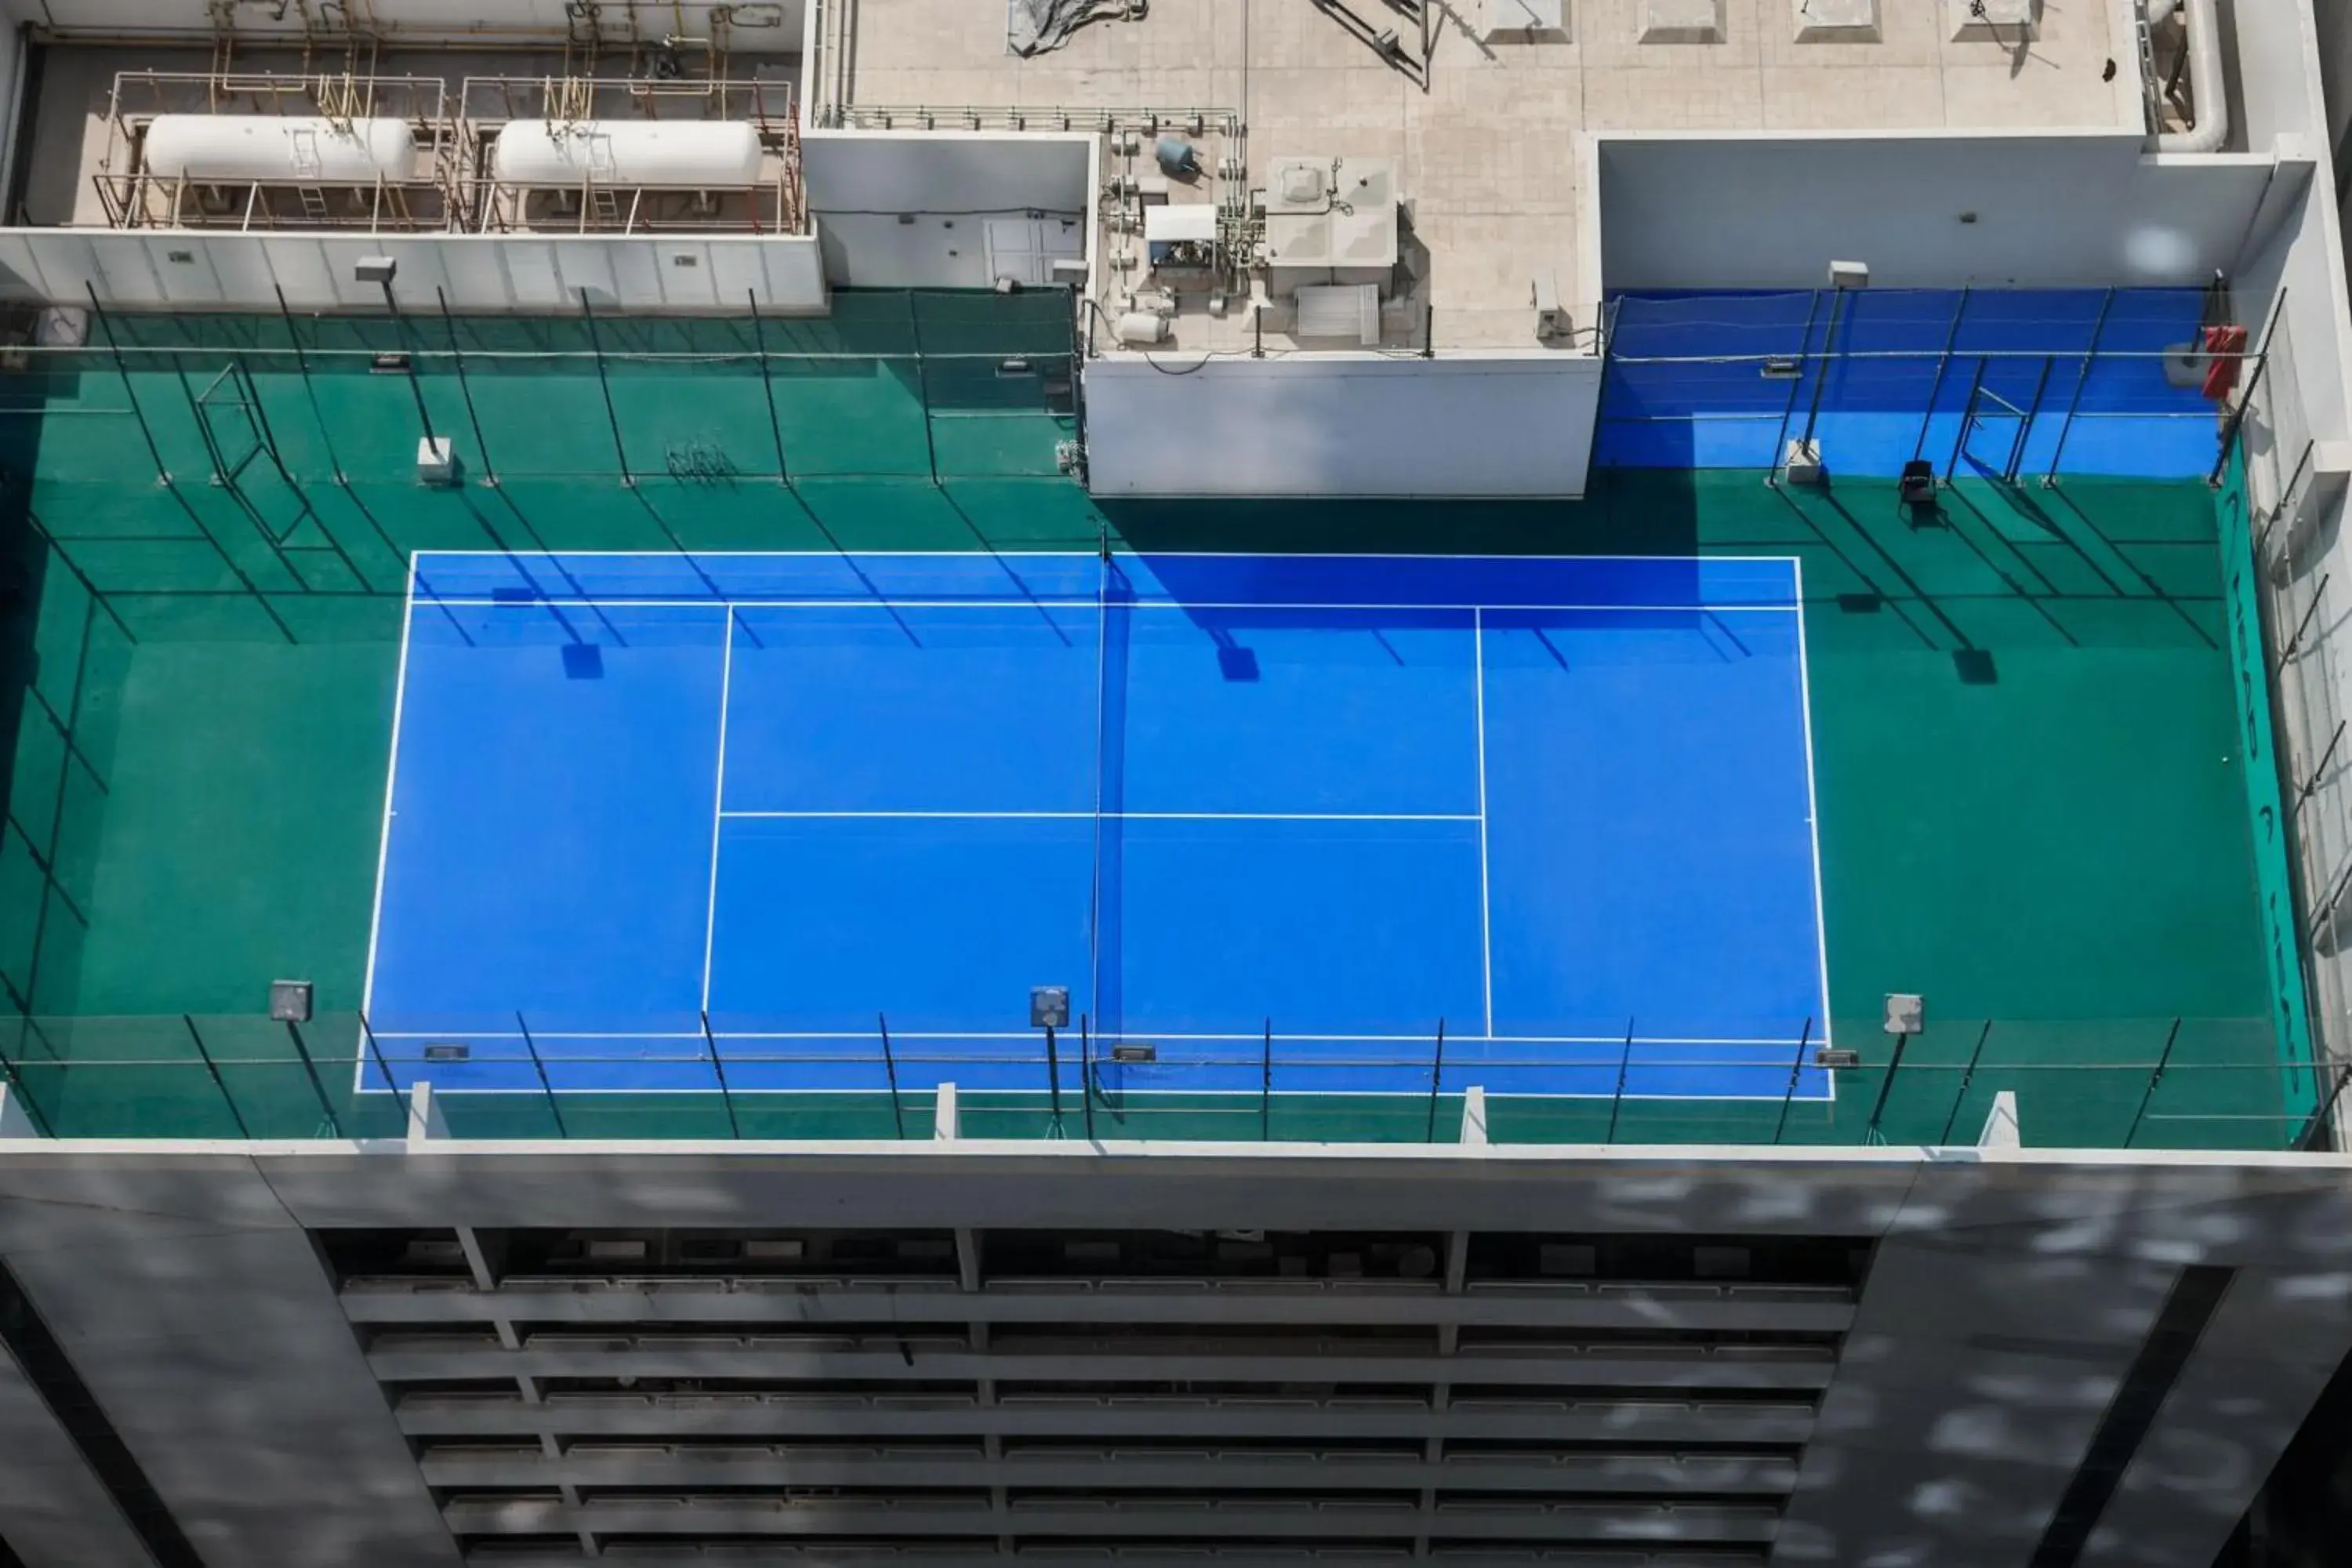 Tennis court, Pool View in Residence Inn by Marriott Sheikh Zayed Road, Dubai